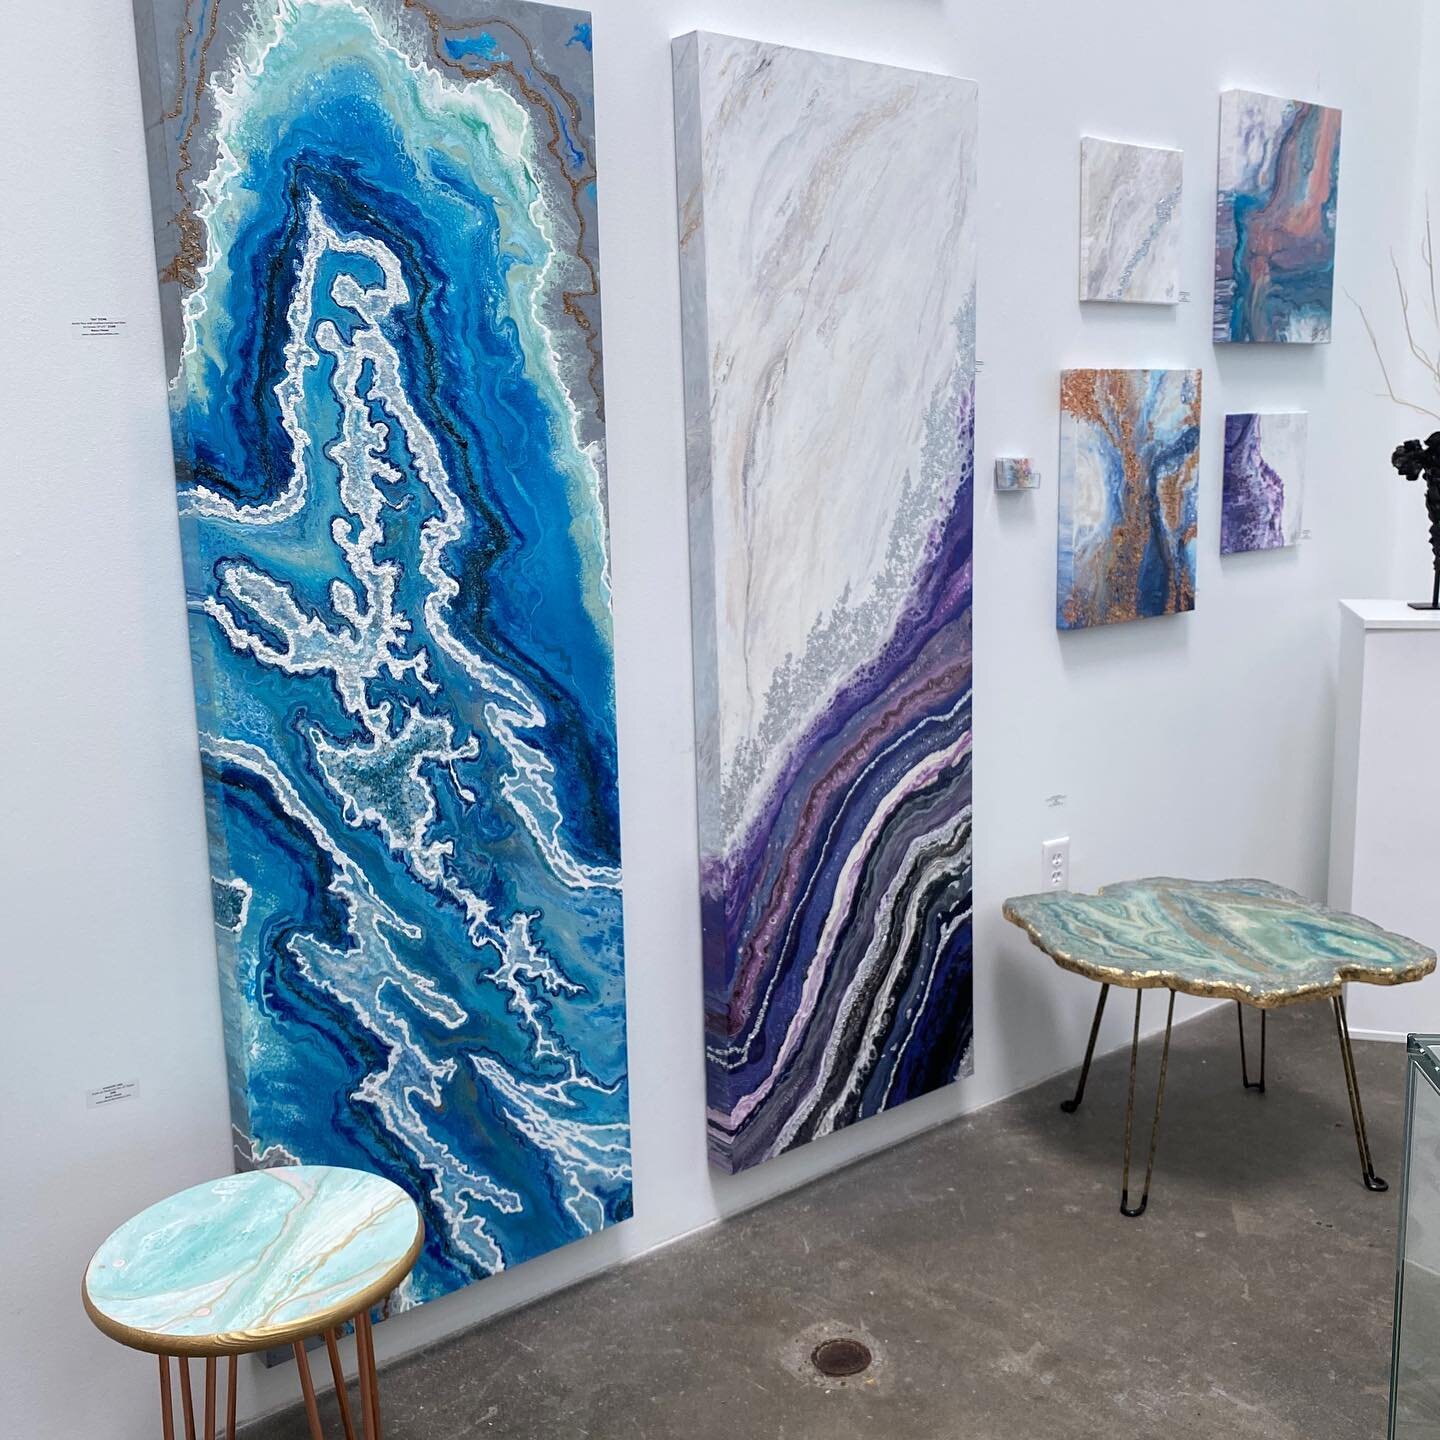 Geode series by @beccaj_art  at @theartnexus - stop by for the Fall Art Walk Saturday Oct 3, 5-9pm